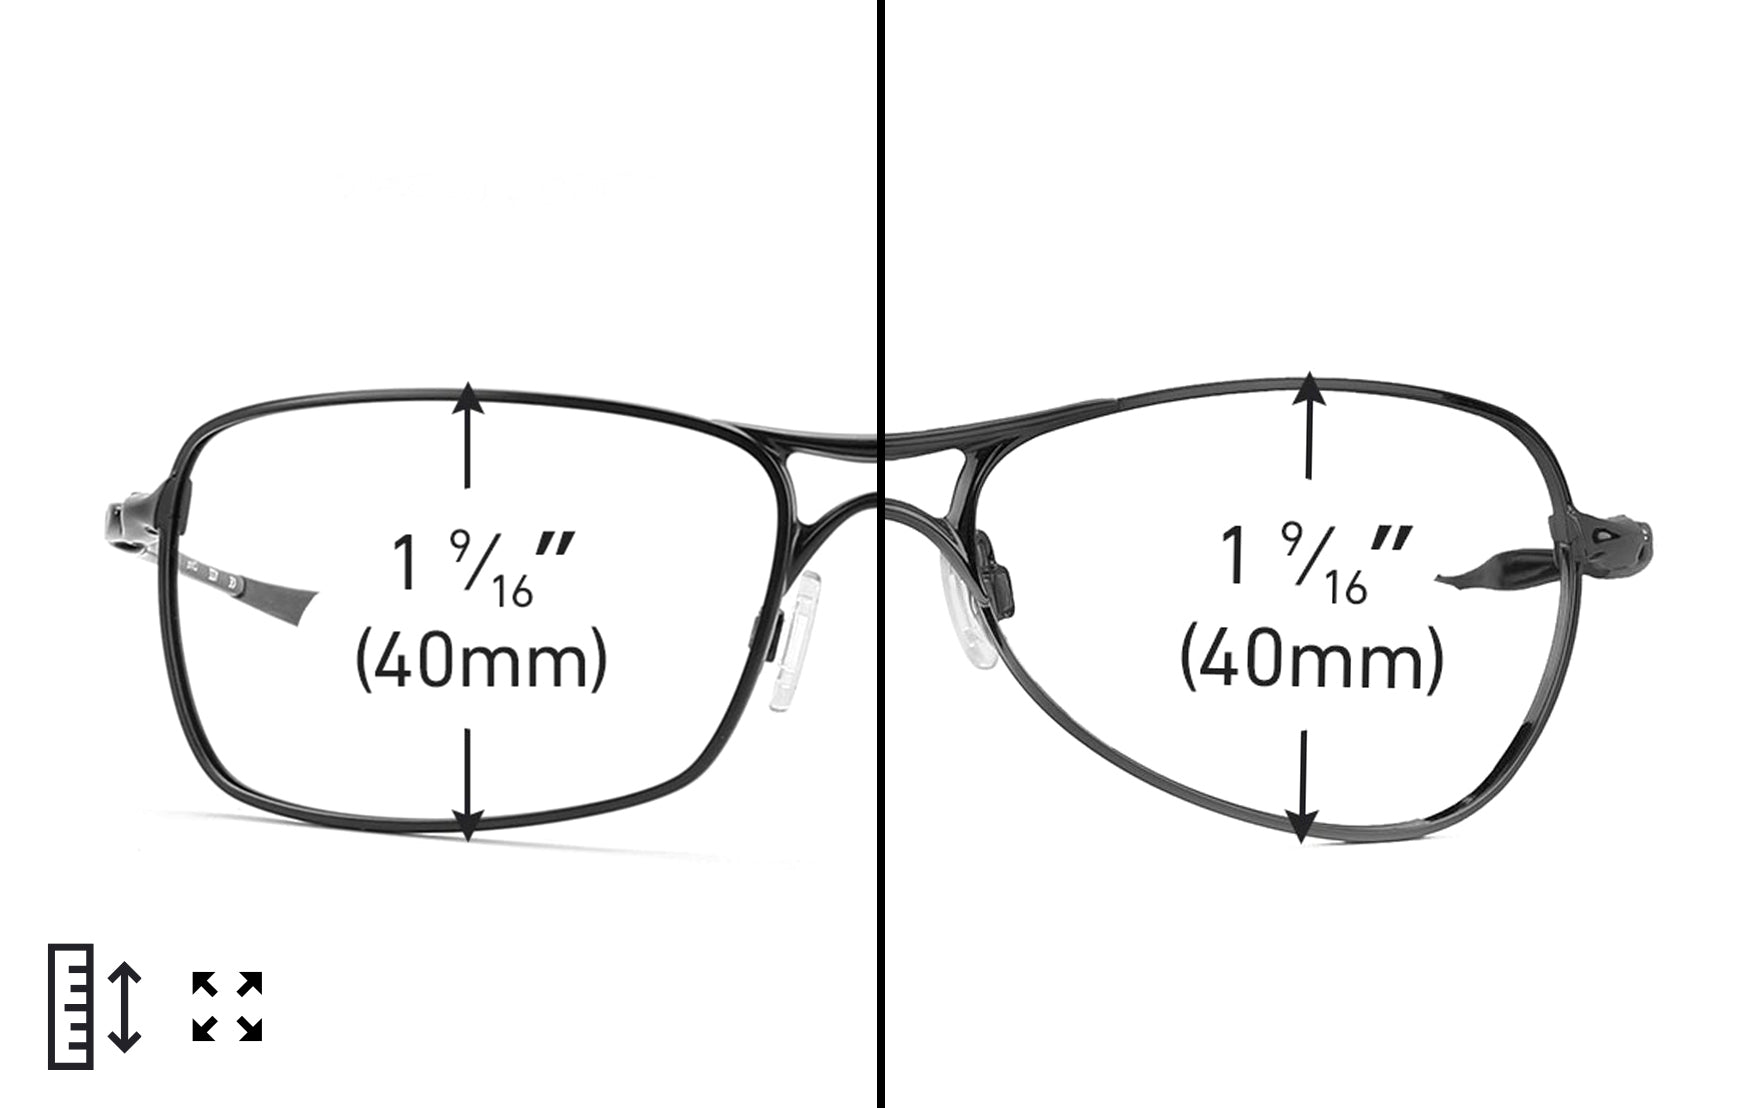 How to Measure Sunglasses: A Step by Step Guide